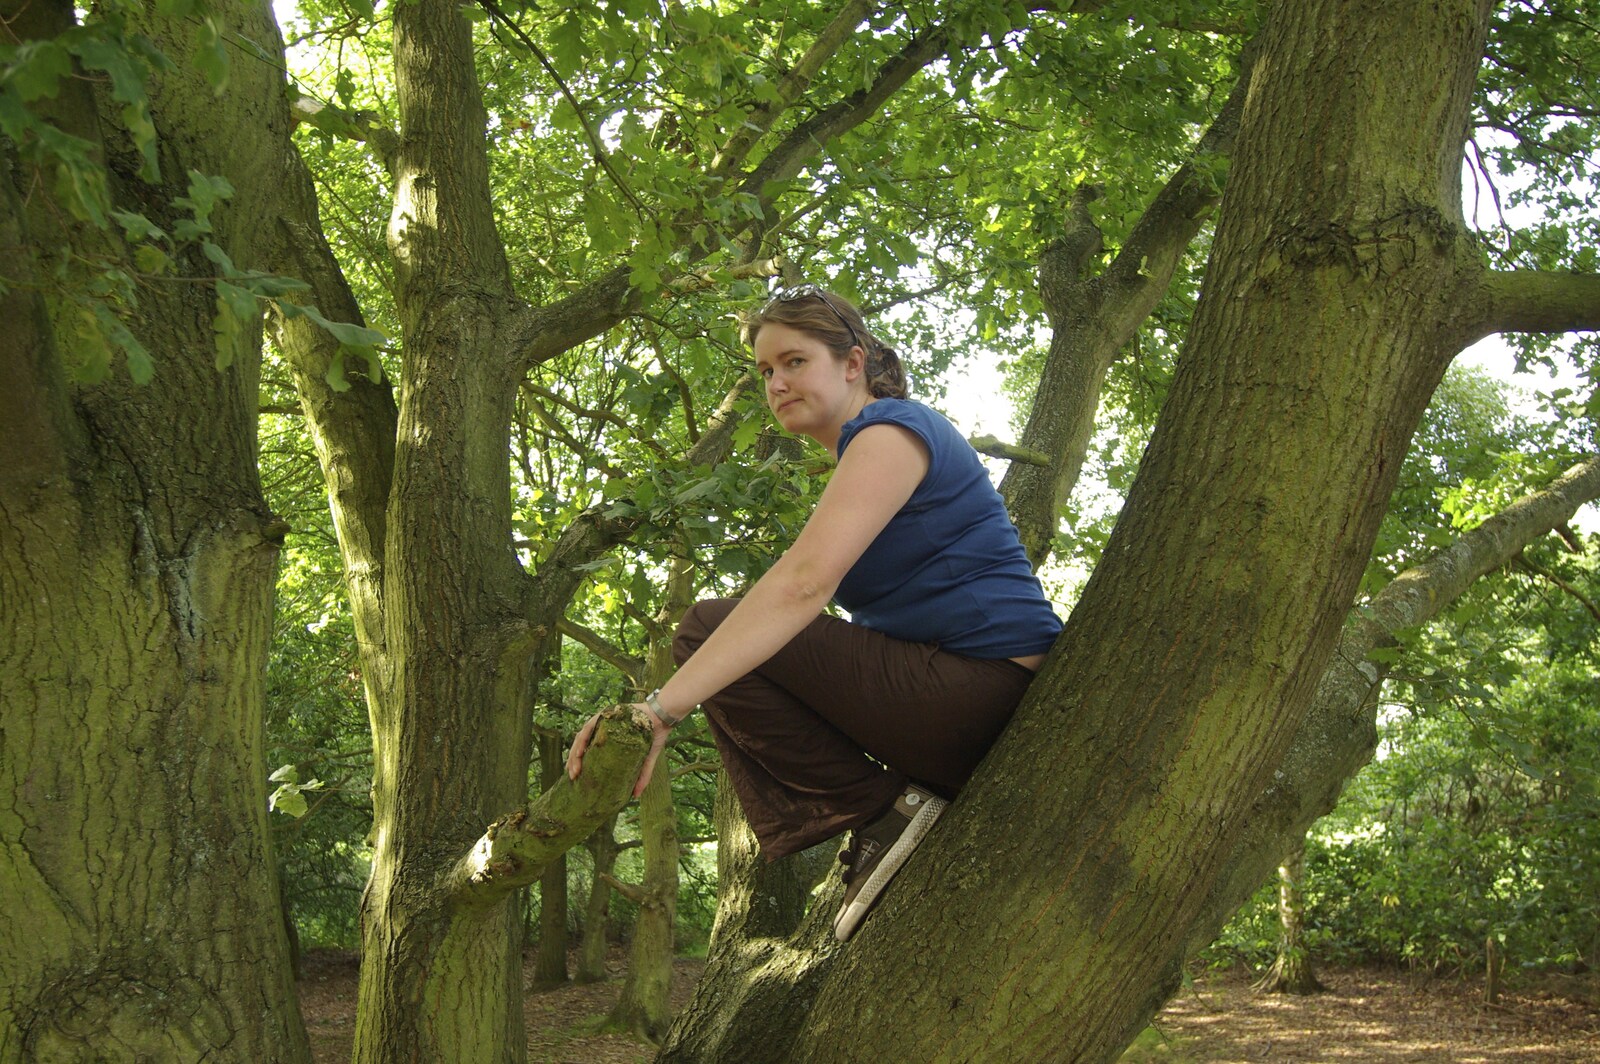 Isobel climbs a tree from A Picnic on The Ling, Wortham, Suffolk - 26th August 2007